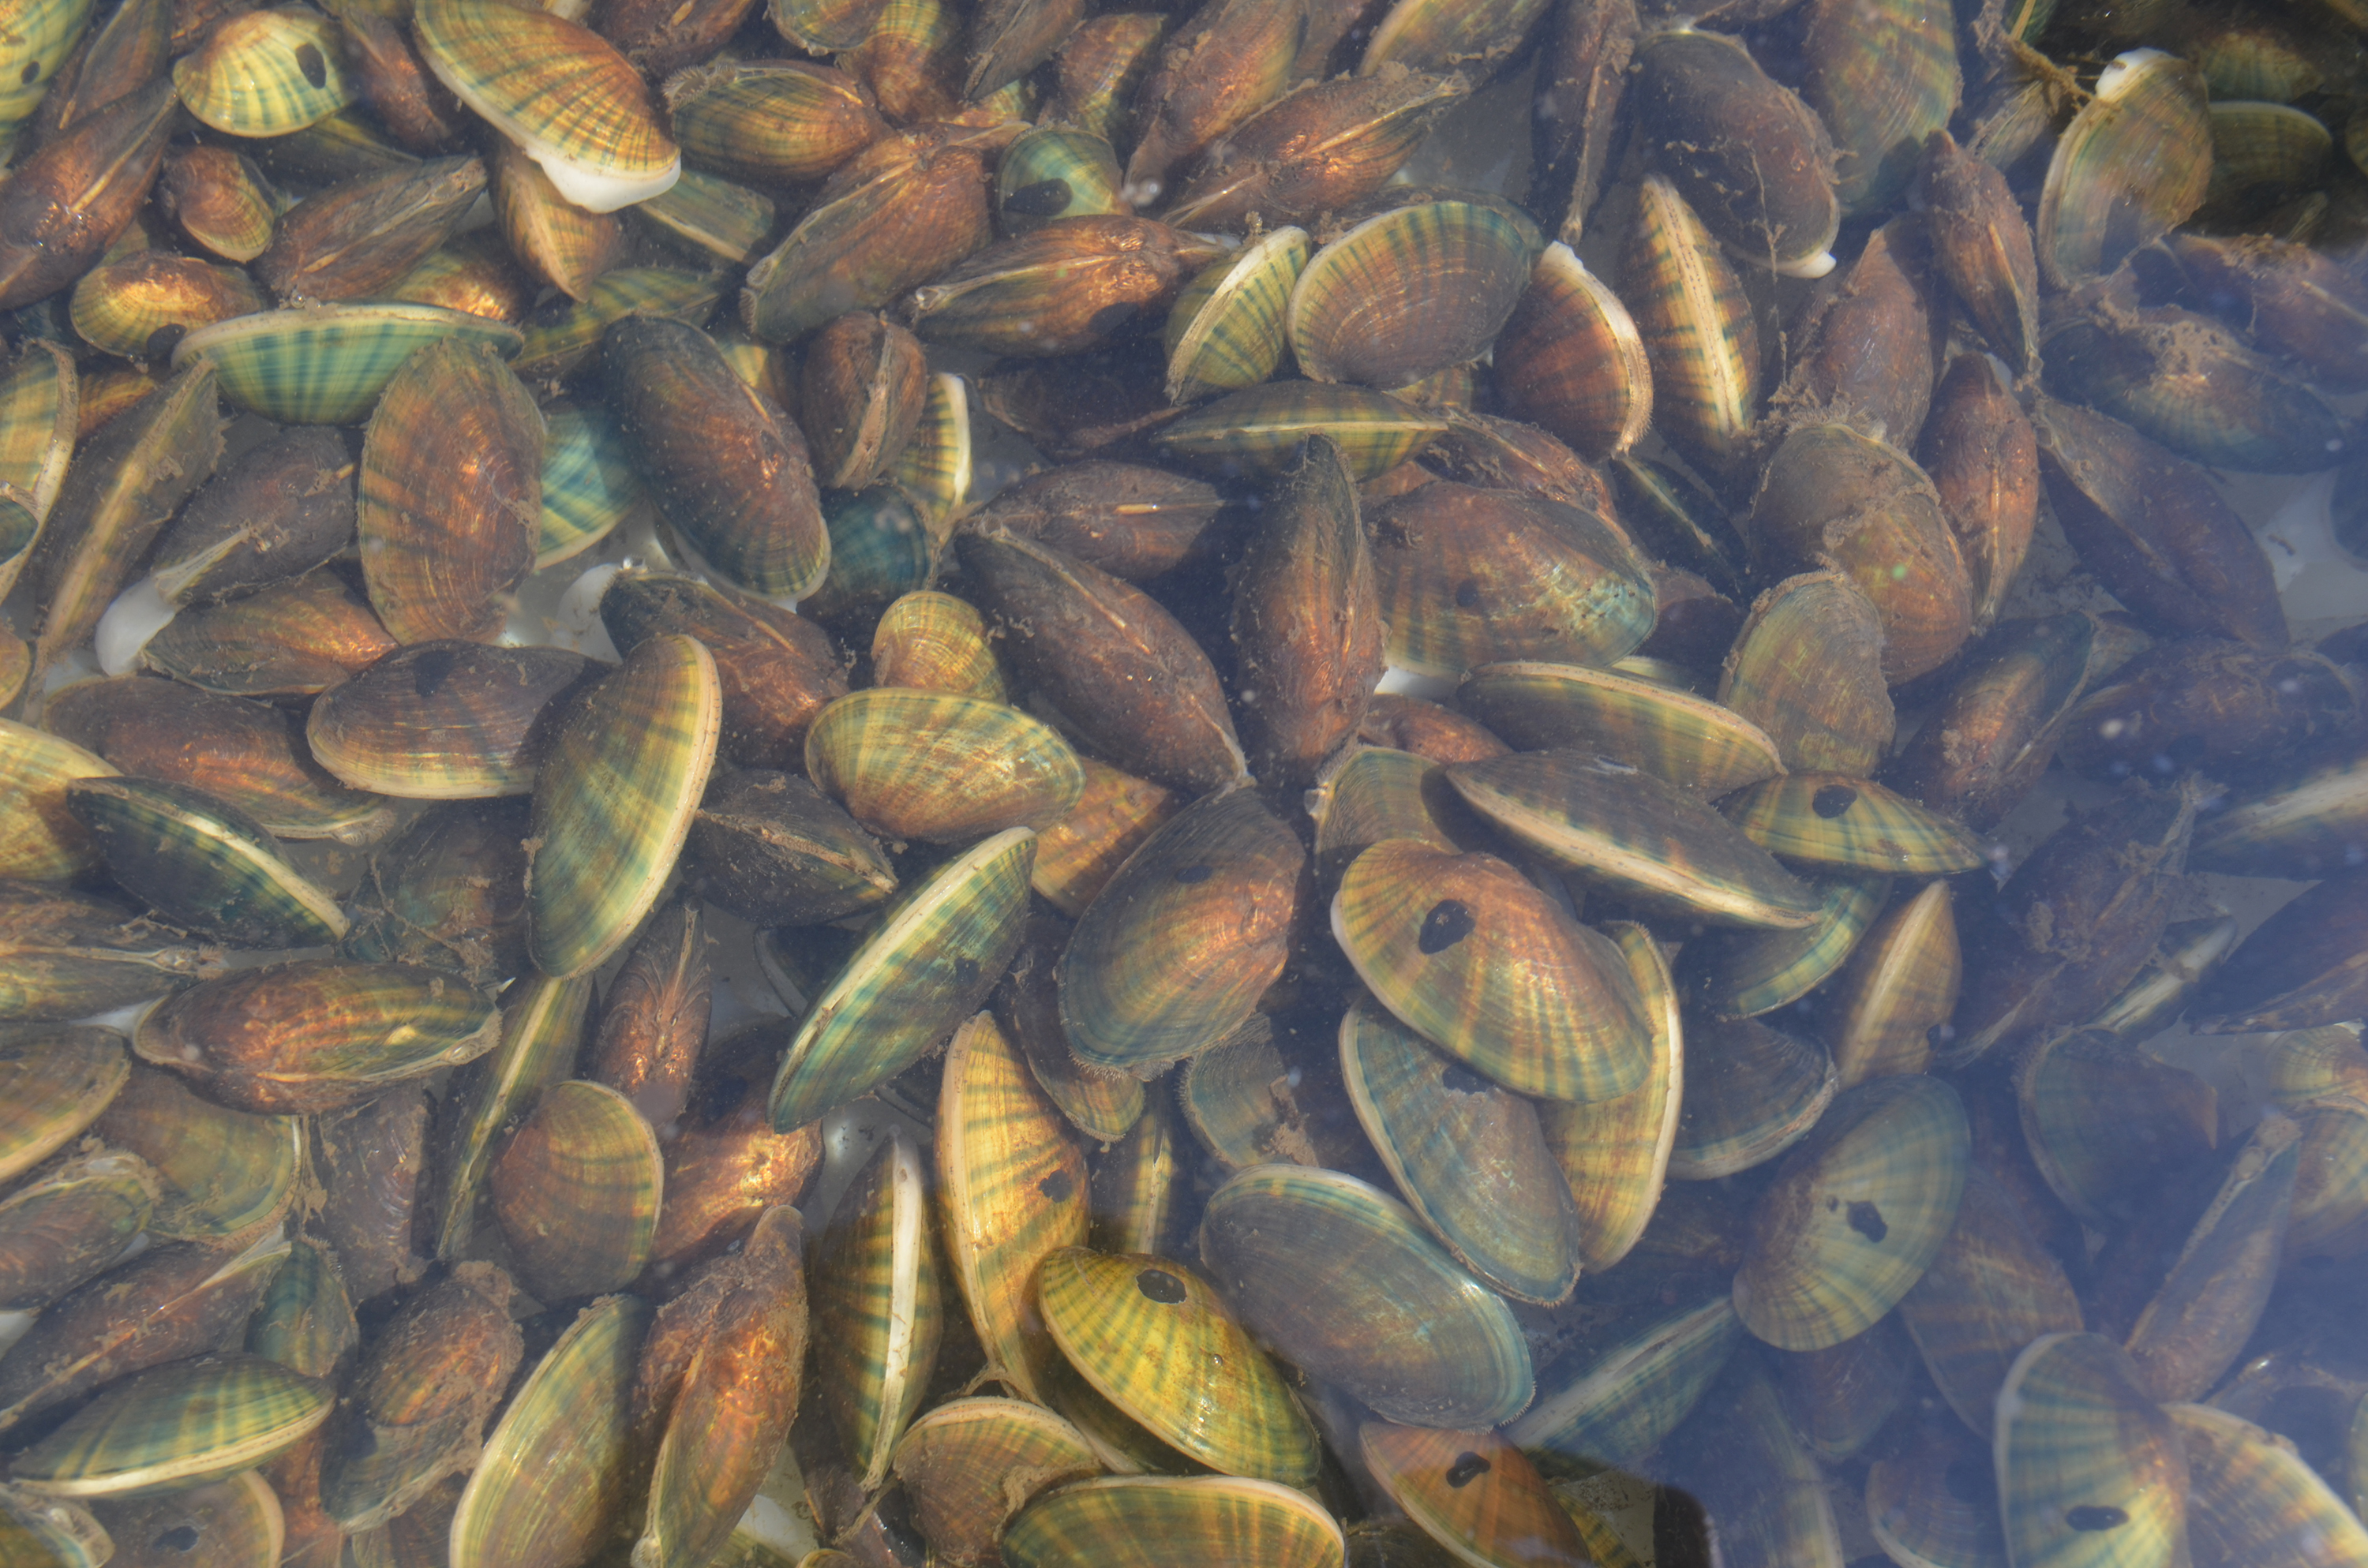 A pile of mussels at the bottom of a clear stream.